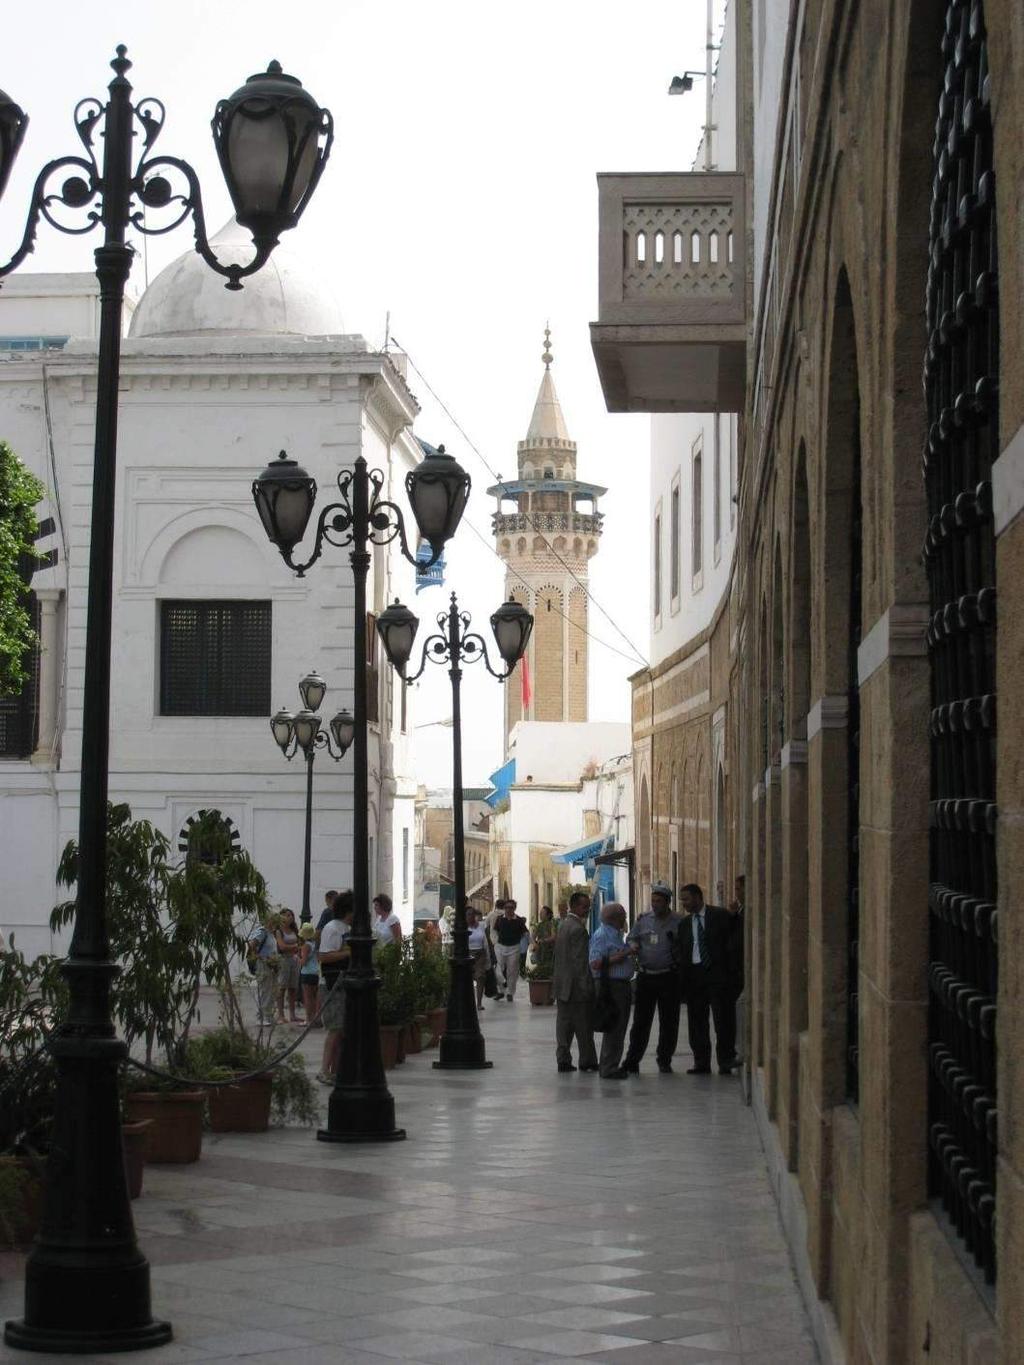 Medina, with a direct path to the Grand Mosque